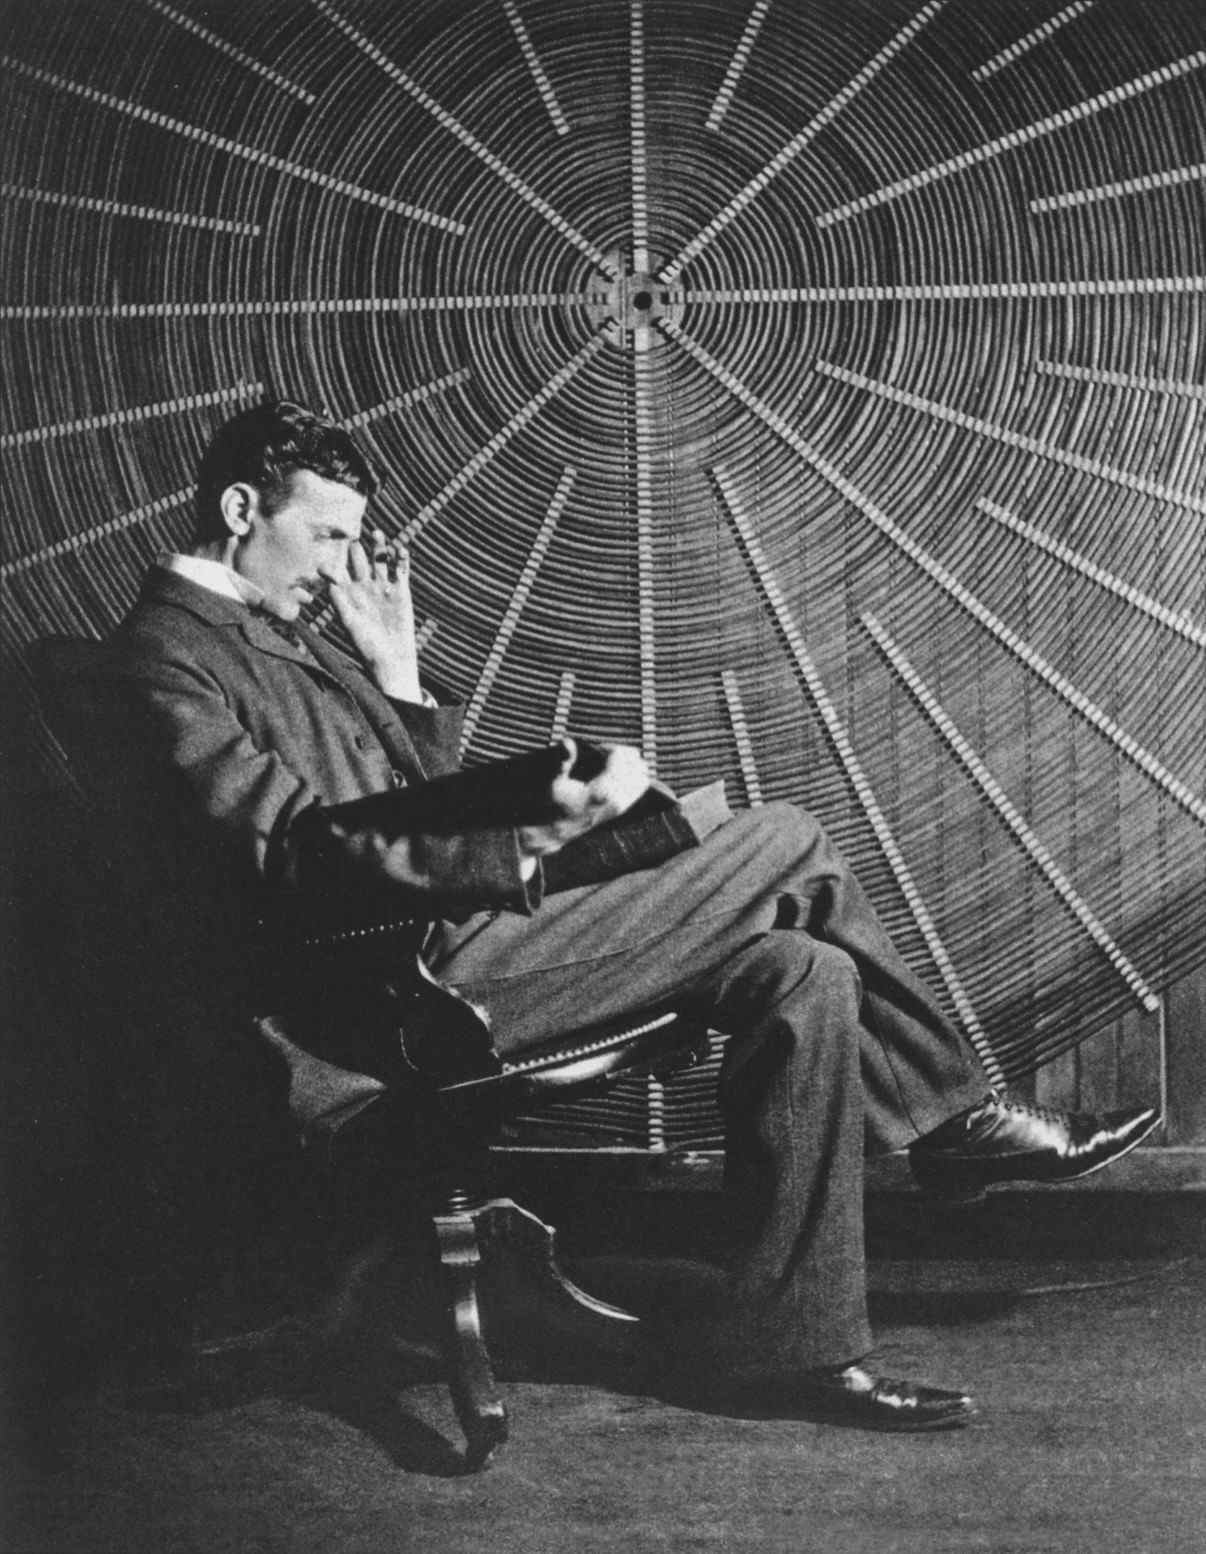 Tesla sitting in front of a spiral coil used in his wireless power experiments at his East Houston St. laboratory